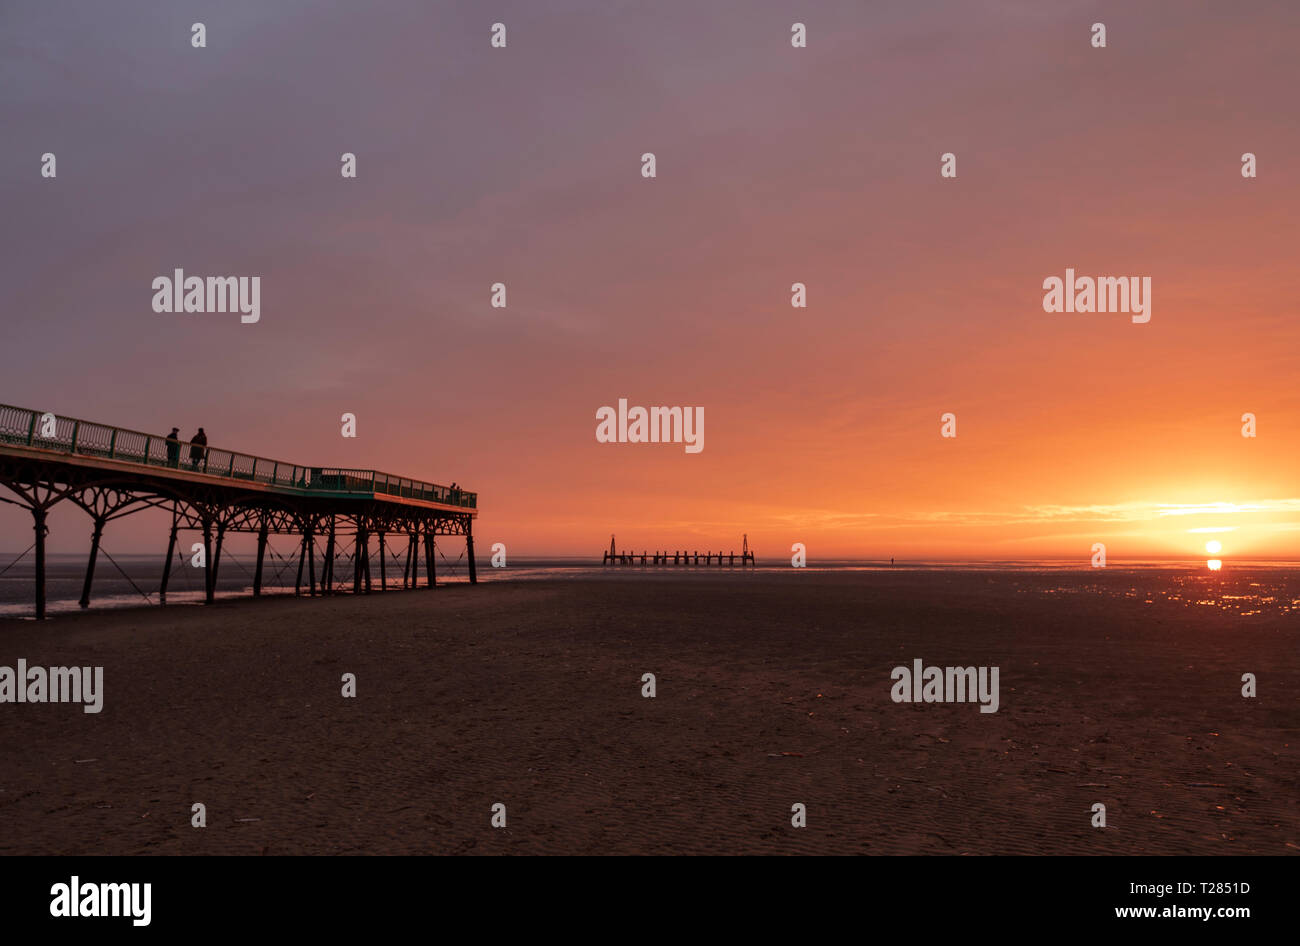 St Anne's Pier, a Victorian pier, at sunset in the English seaside